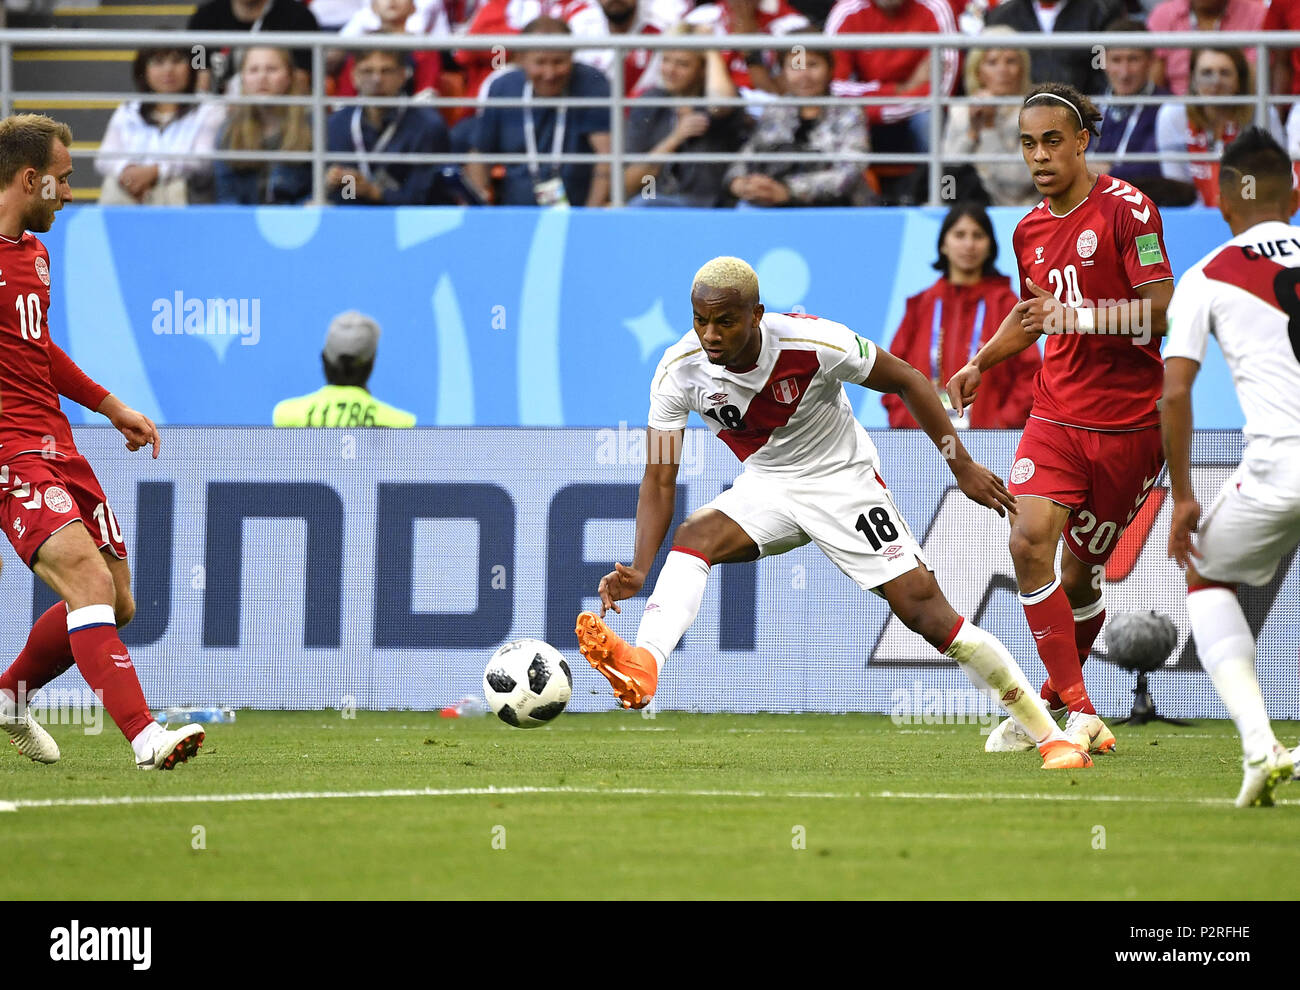 Saransk, Russia. 16th June, 2018. Andre Carrillo (C) of Peru competes during a group C match between Peru and Denmark at the 2018 FIFA World Cup in Saransk, Russia, June 16, 2018. Credit: He Canling/Xinhua/Alamy Live News Stock Photo